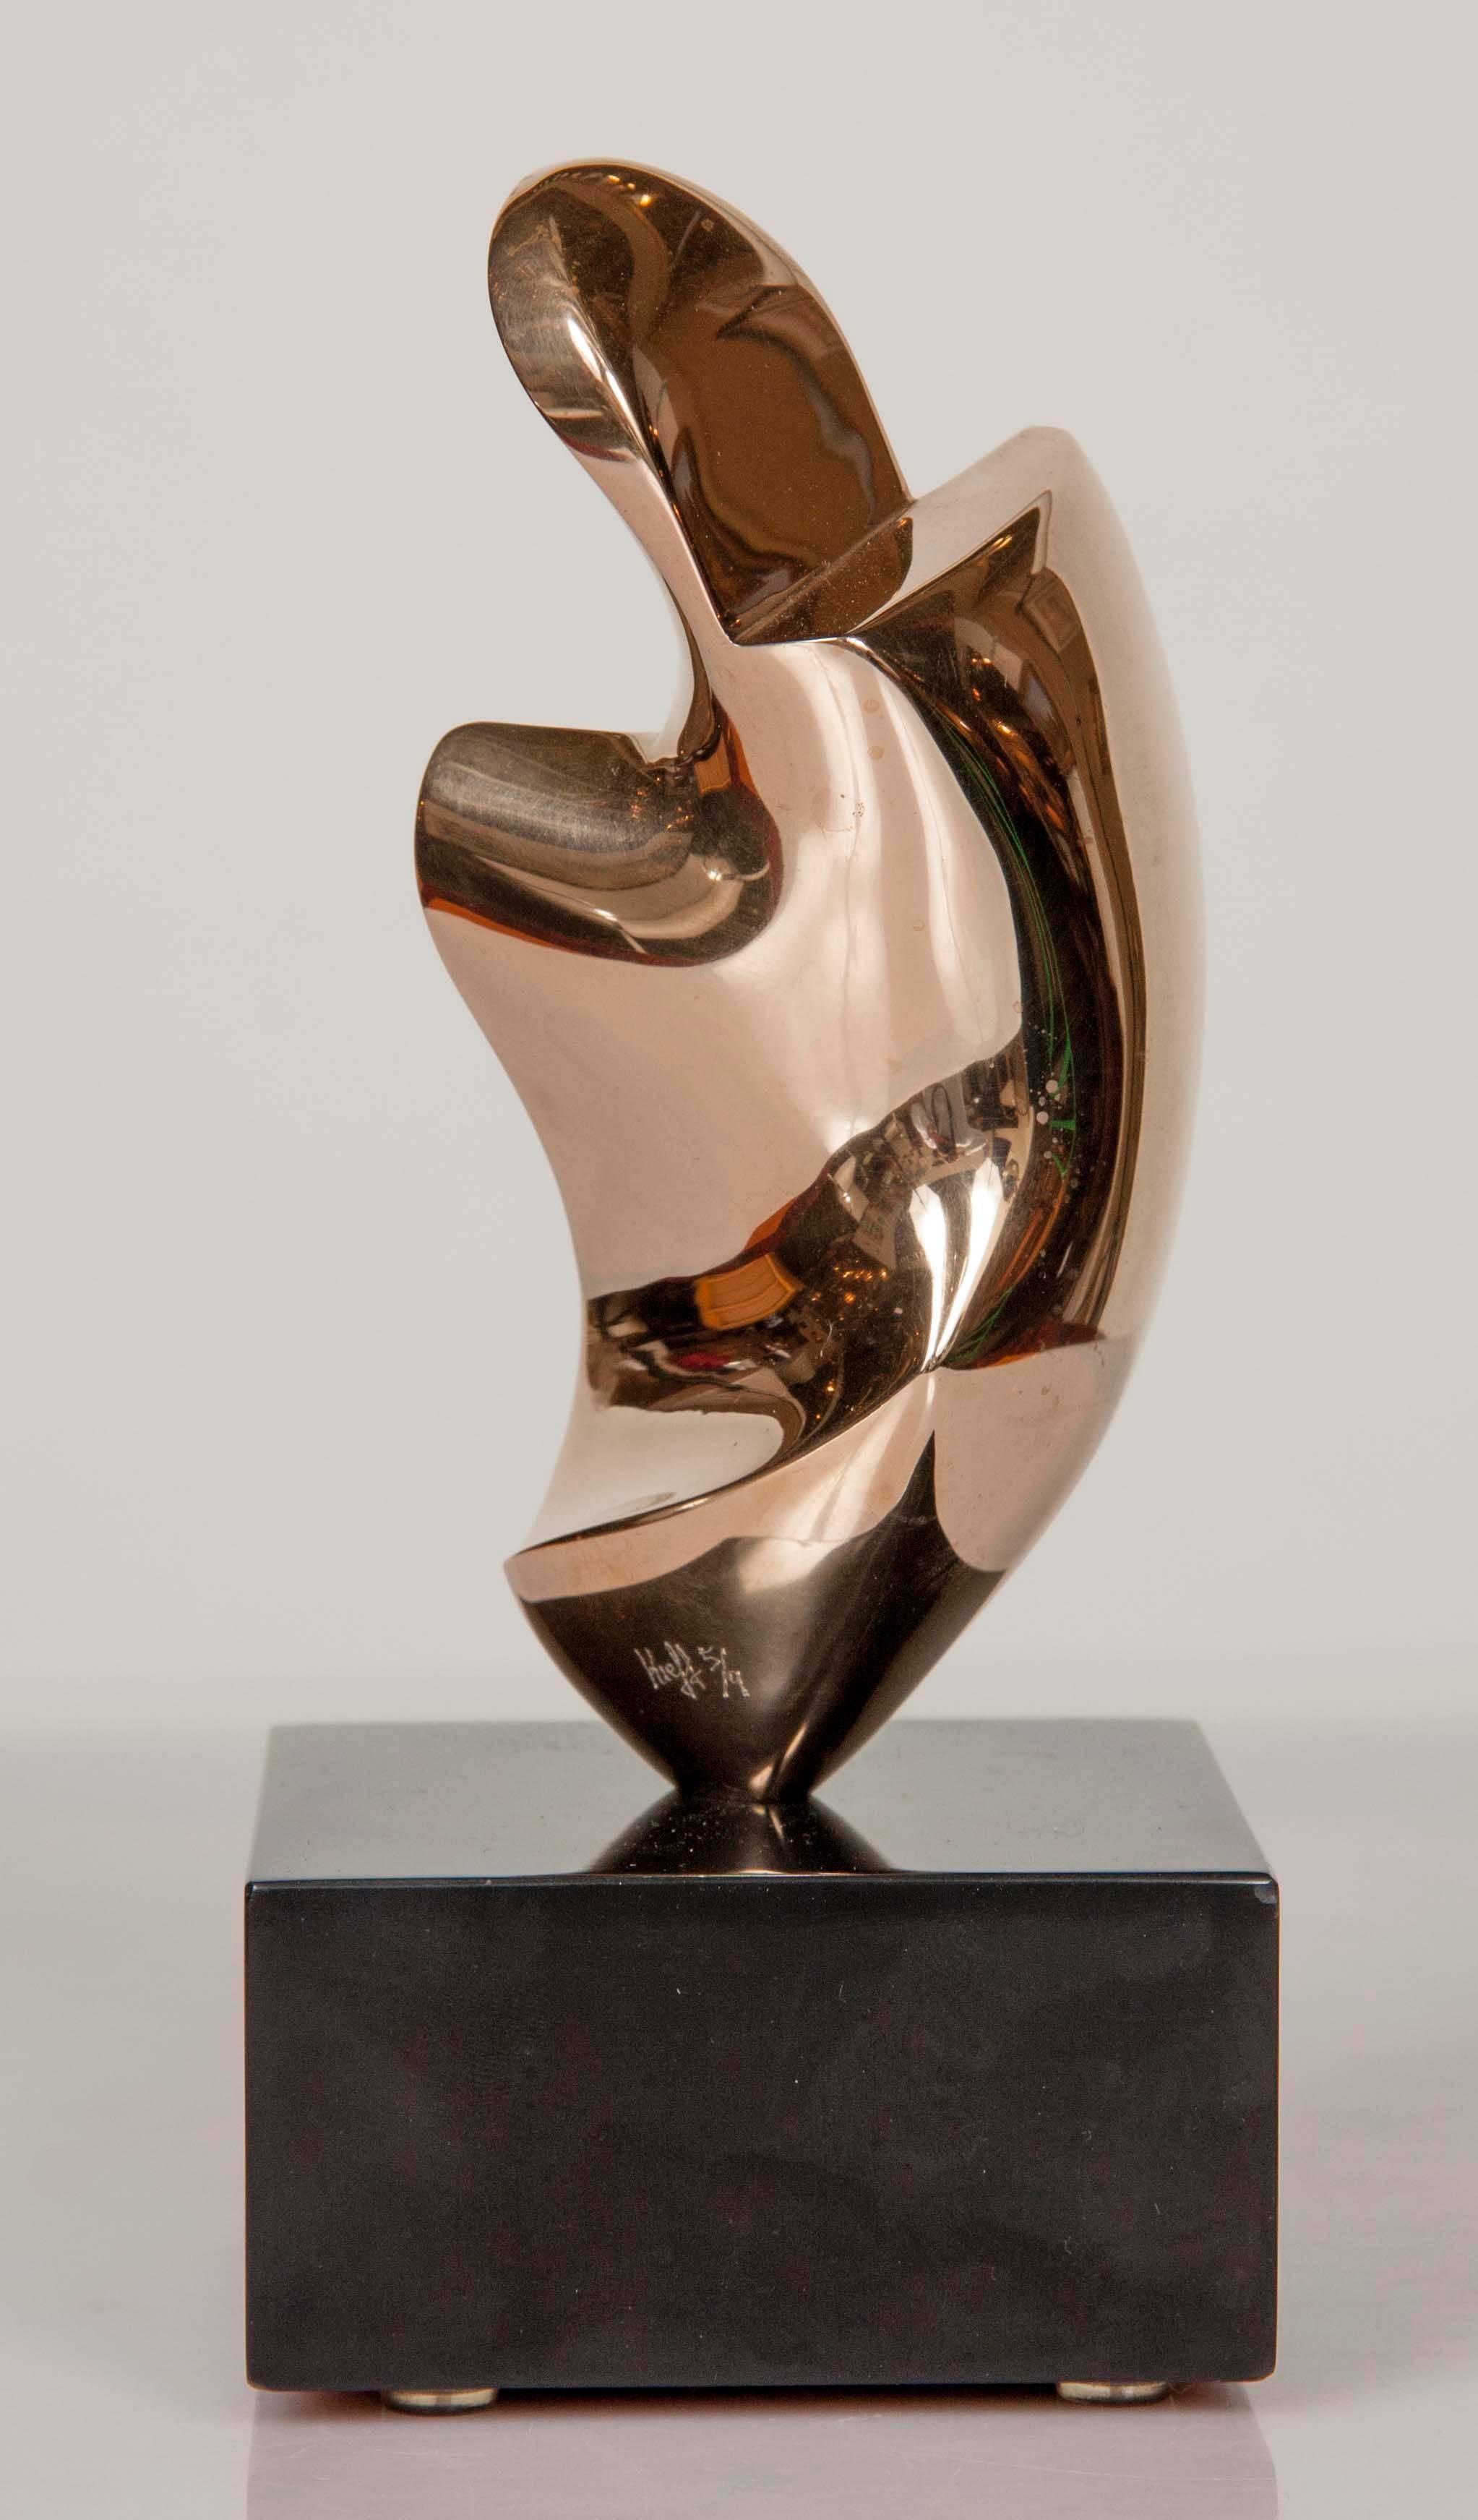 20th Century Bronze Abstract Sculpture by Antonio Grediaga Kieff, Signed and Numbered 5/9